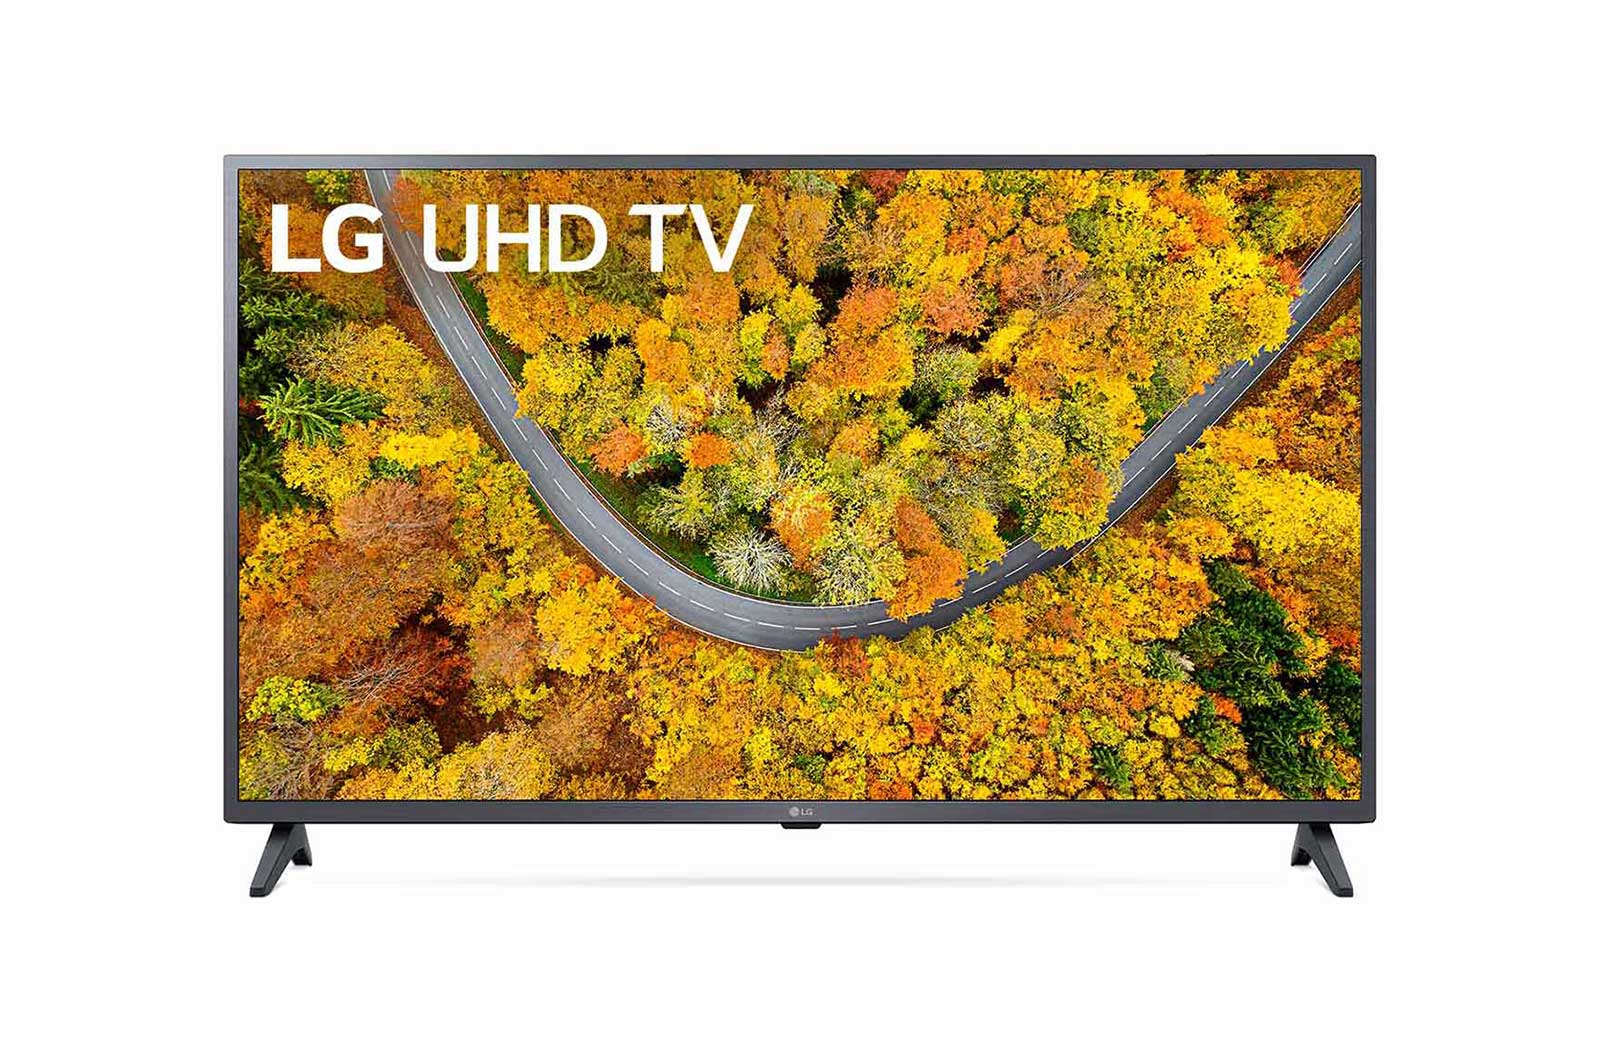 LG 43-inch UHD TV With Cinematic Screen 4K Active HDR Design